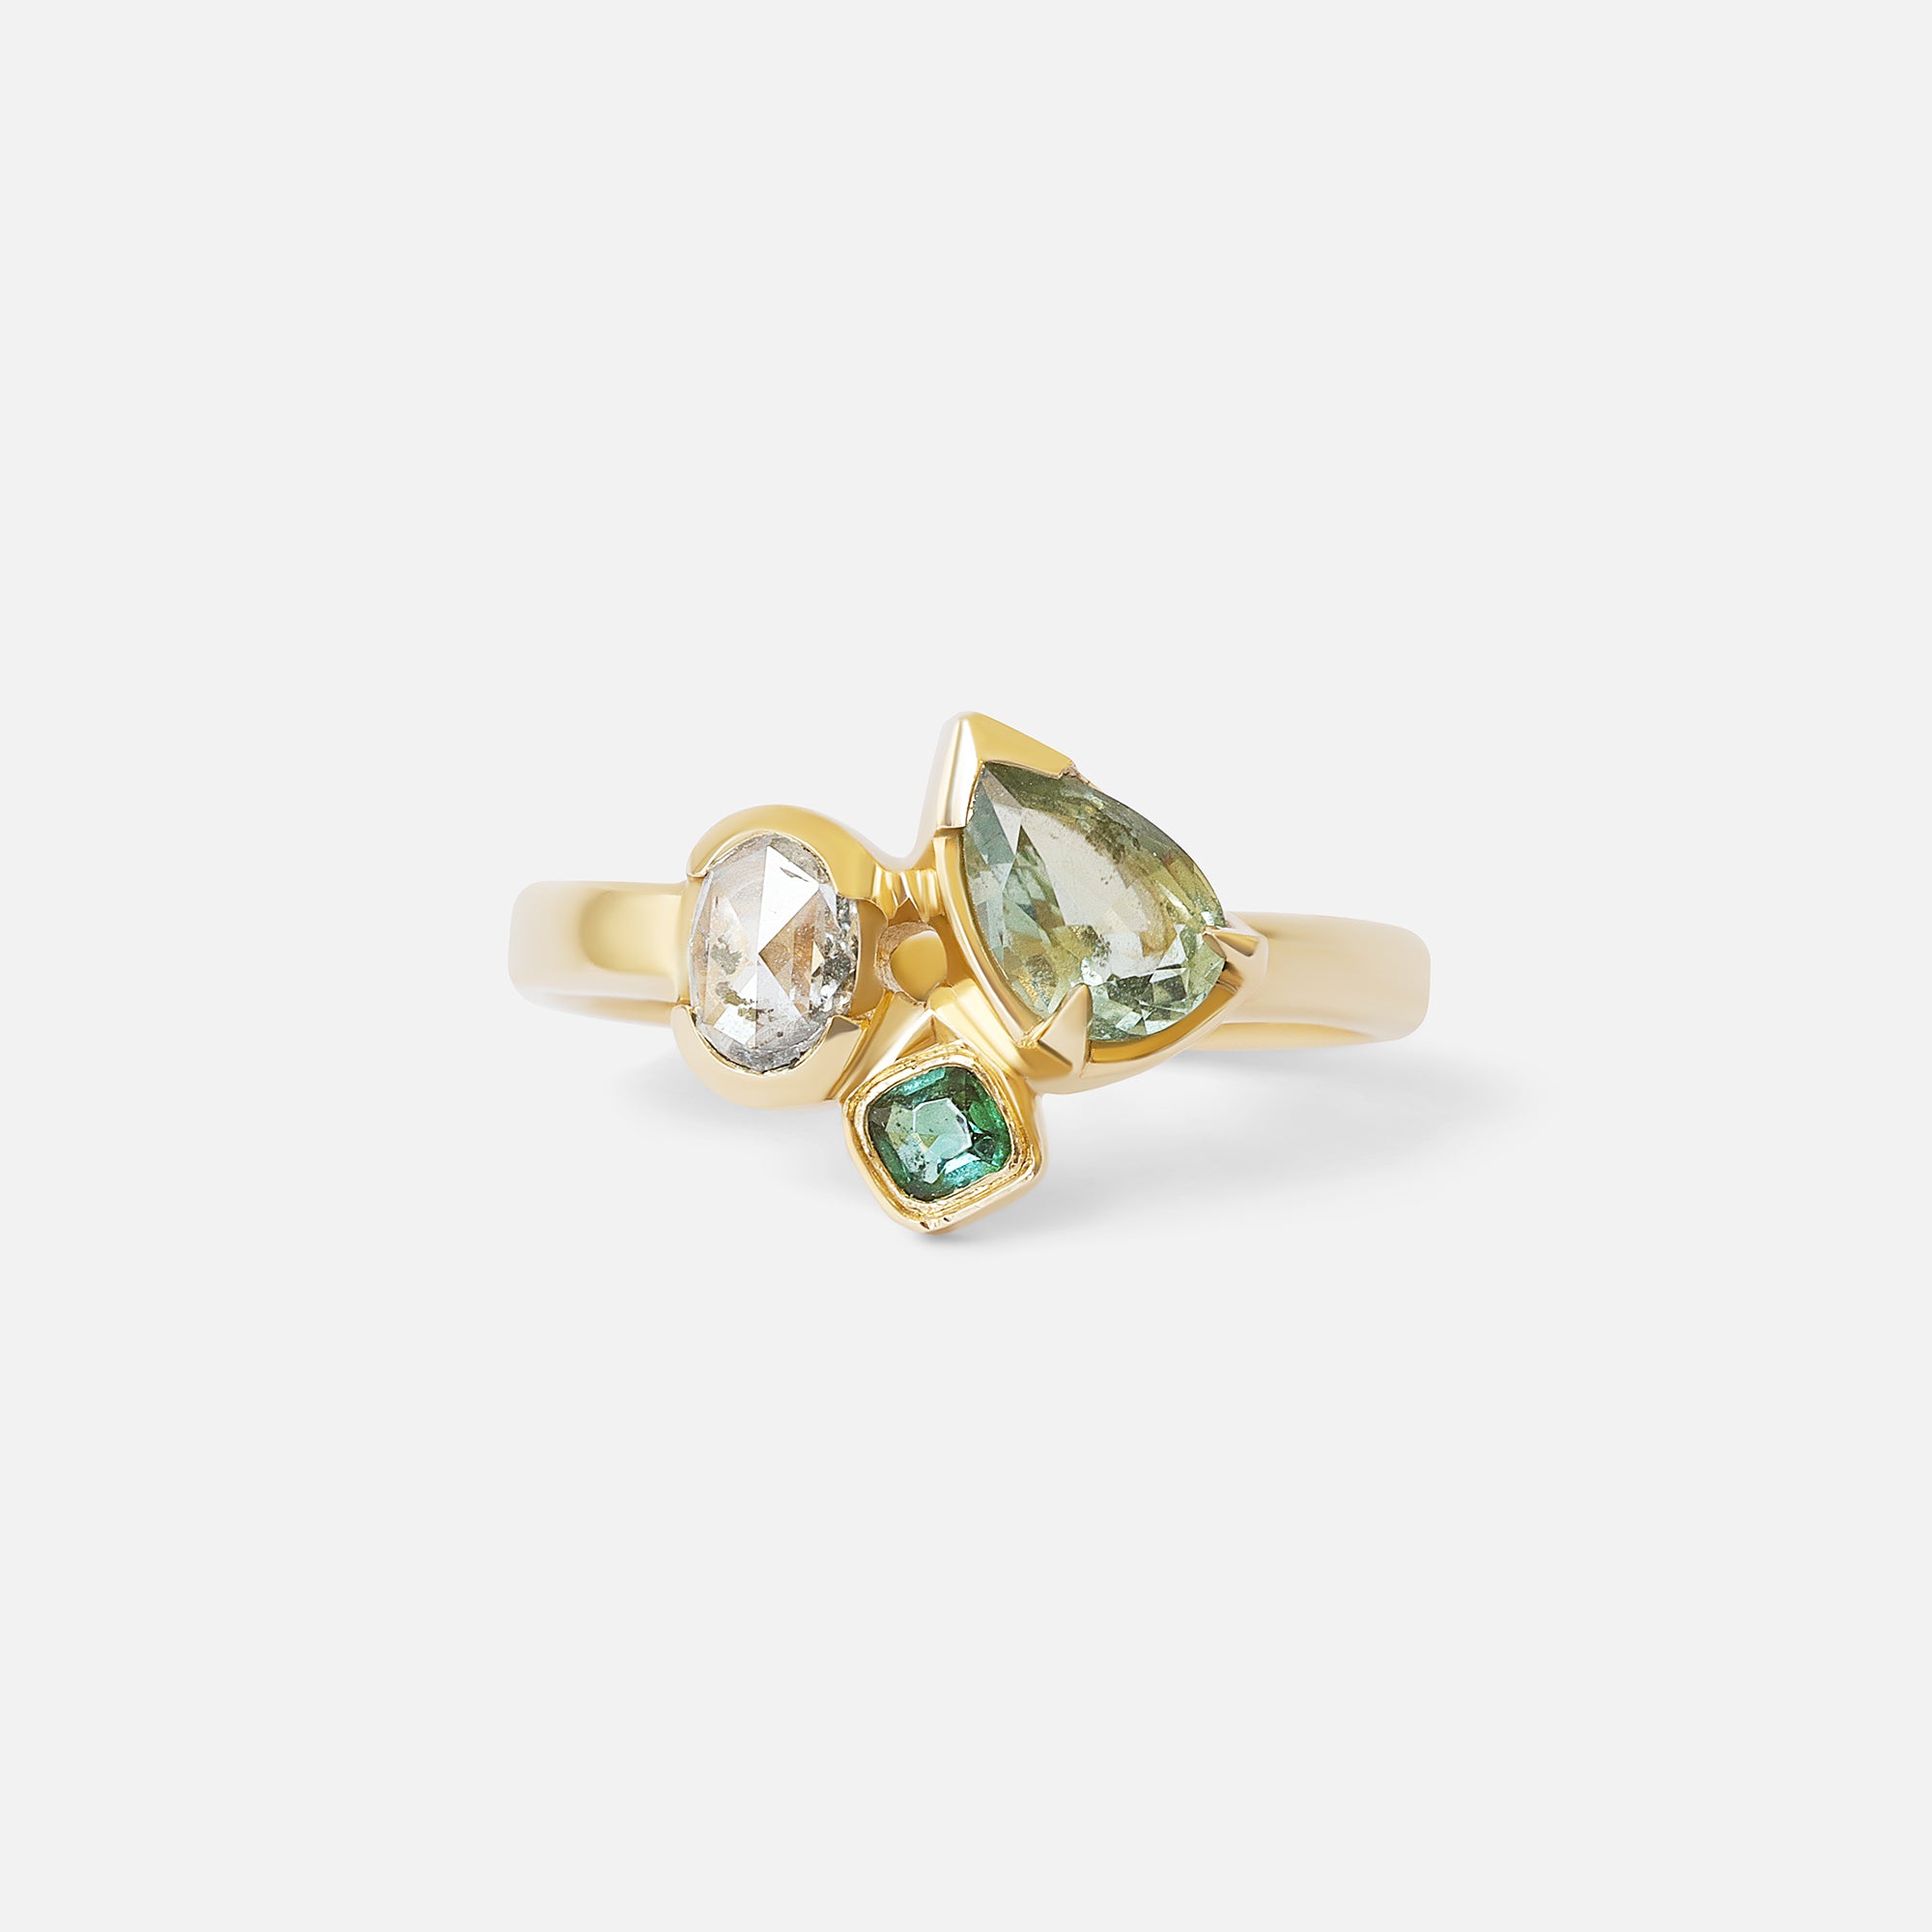 Paraiba and Diamond Droplet / Ring By Kestrel Dillon in Engagement Rings Category